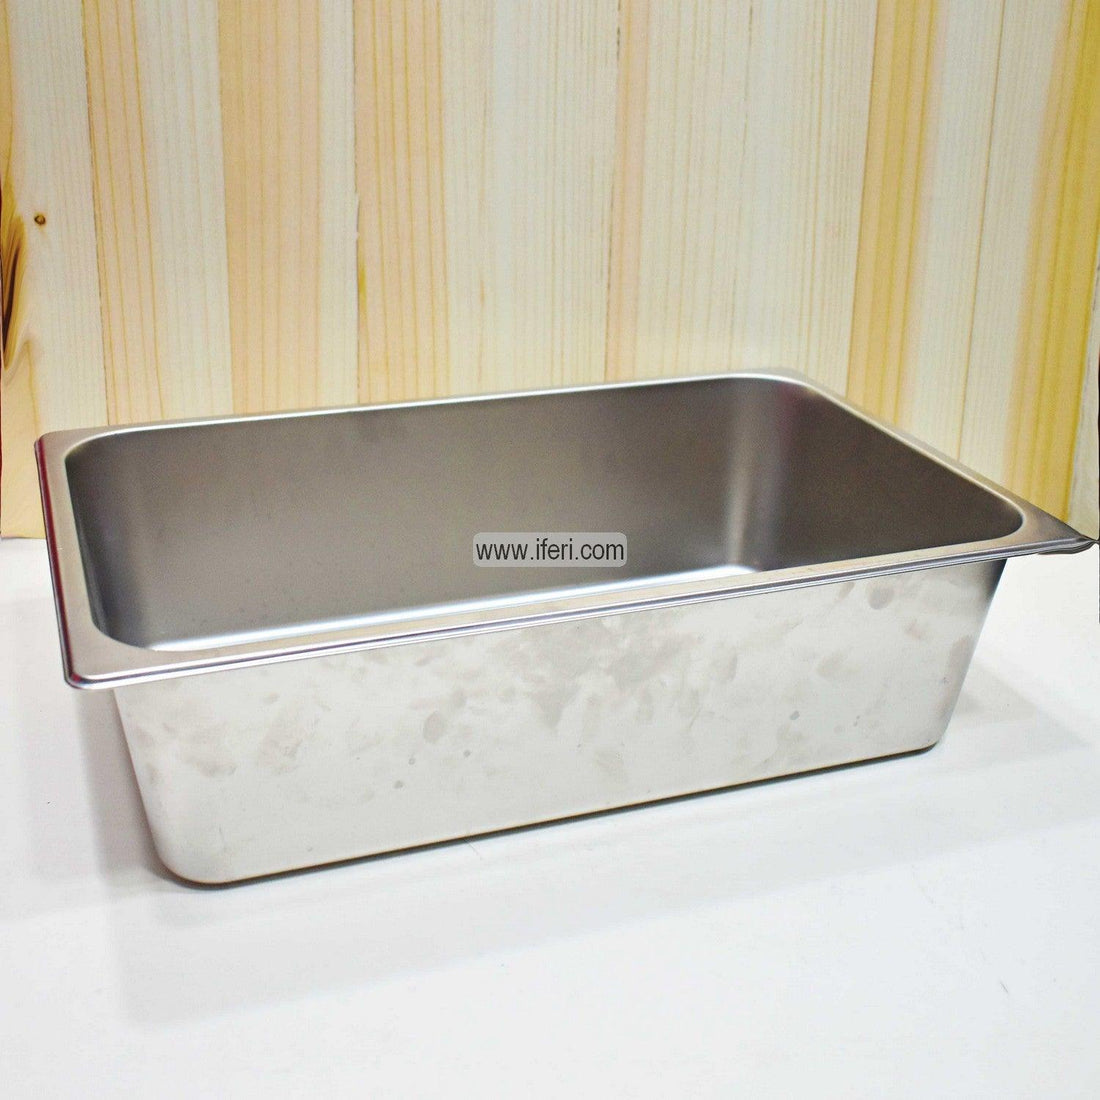 21 Inch Stainless Steel Food Pan Without SN0615 Price in Bangladesh - iferi.com